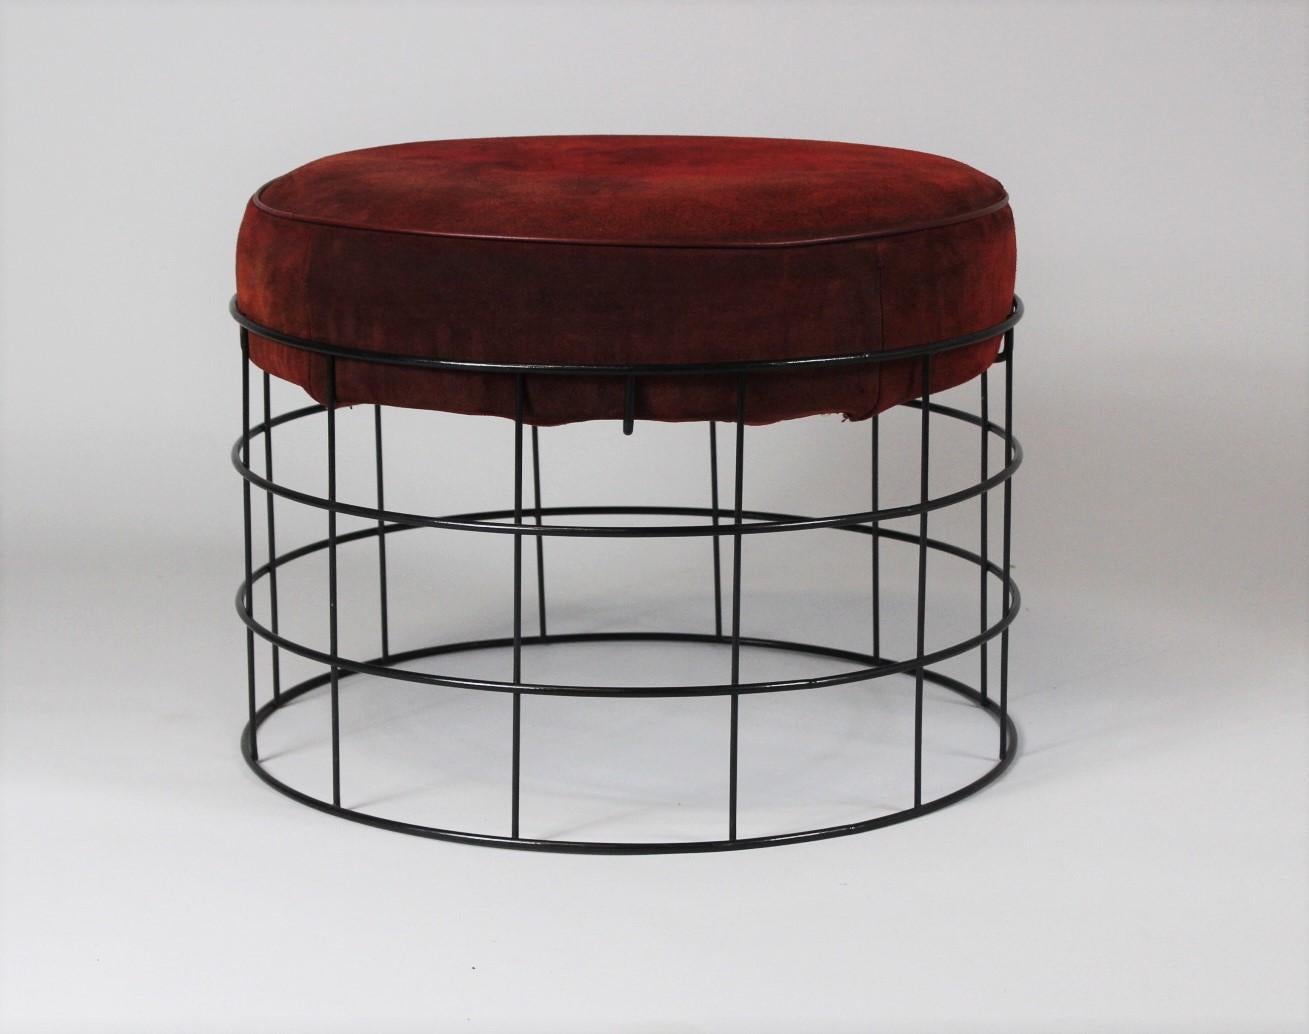 Stool T1 from the wire frame collection by Verner Panton with suede leather, made in 1959 in Copenhagen, Denmark. Produced by Plus Linje Copenhagen.